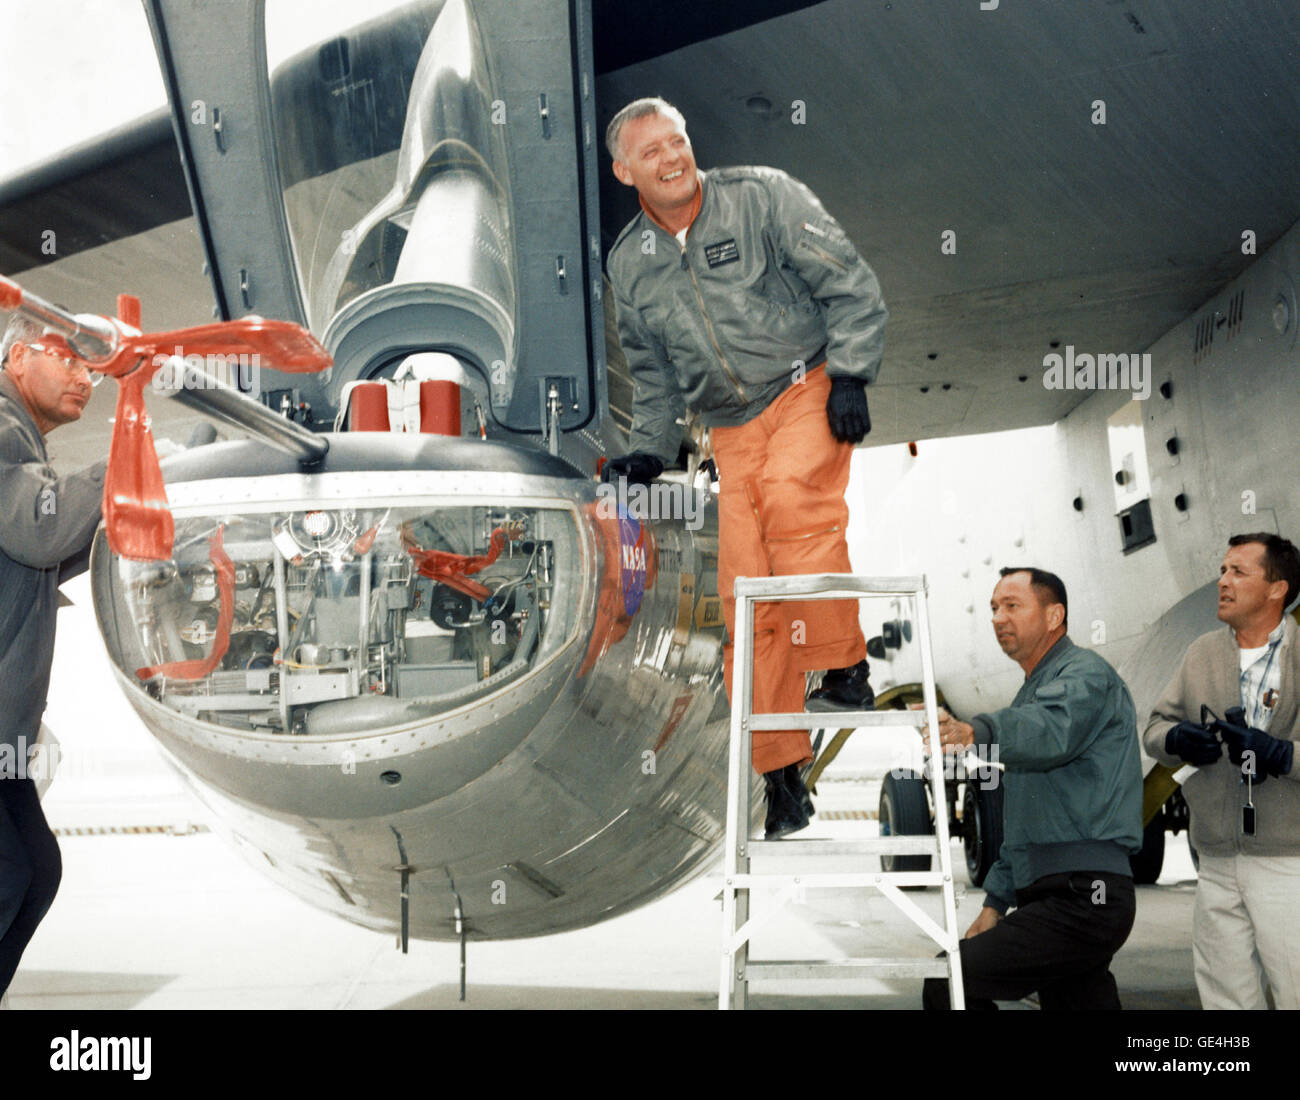 Jay L. King, Joseph D. Huxman and Orion D. Billeter assist NASA research pilot Milt Thompson (on the ladder) into the cockpit of the M2-F2 lifting body research aircraft at the NASA Flight Research Center (now the Armstrong Flight Research Center). The M2-F2 is attached to a wing pylon under the wing of NASA's B-52 mothership.   Image # : EC66-1154 Date: February 1, 1966 Stock Photo